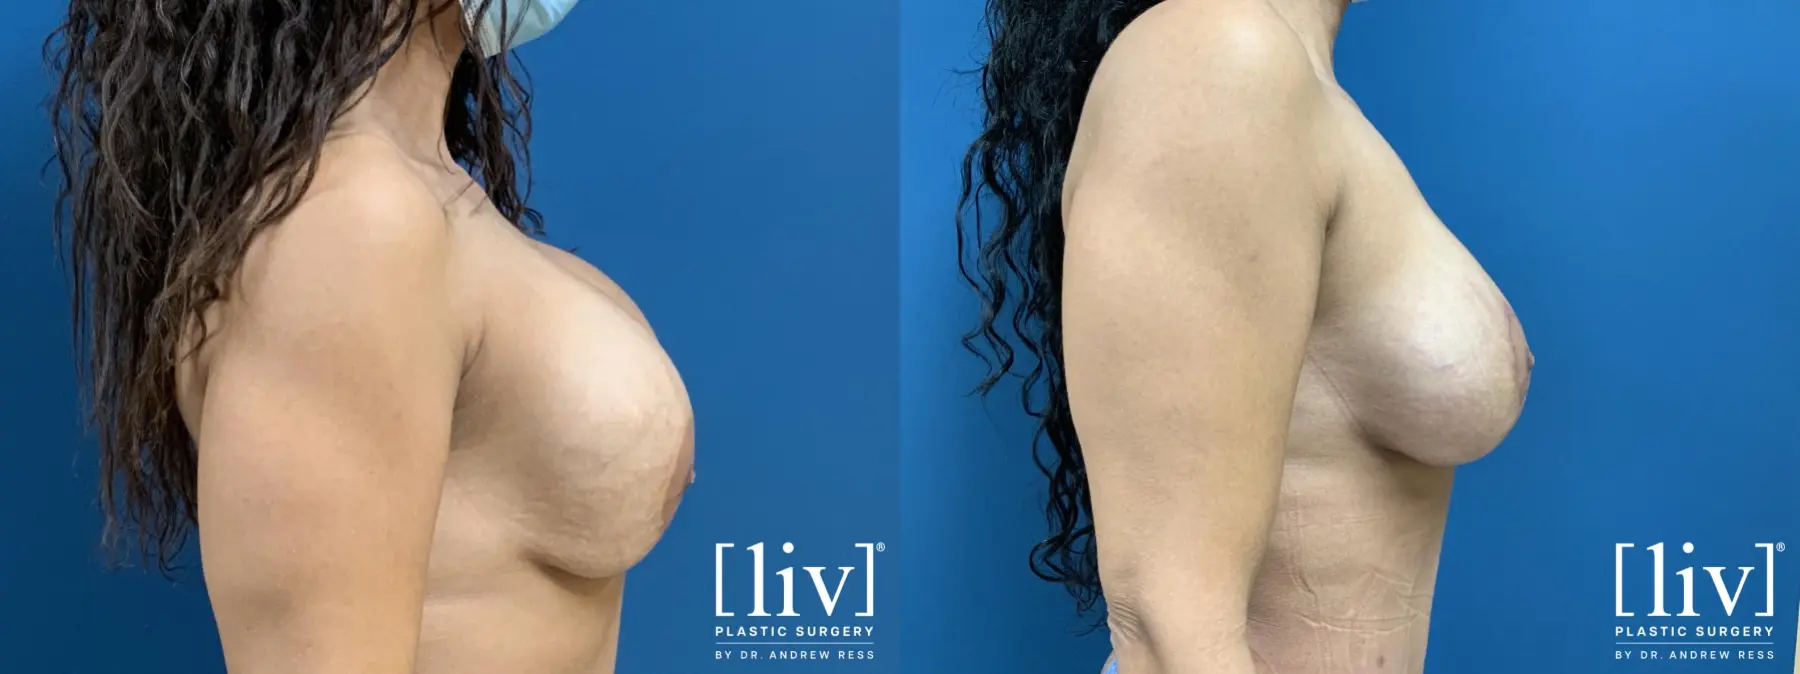 Breast Lift and Implant Exchange - Before and After 5